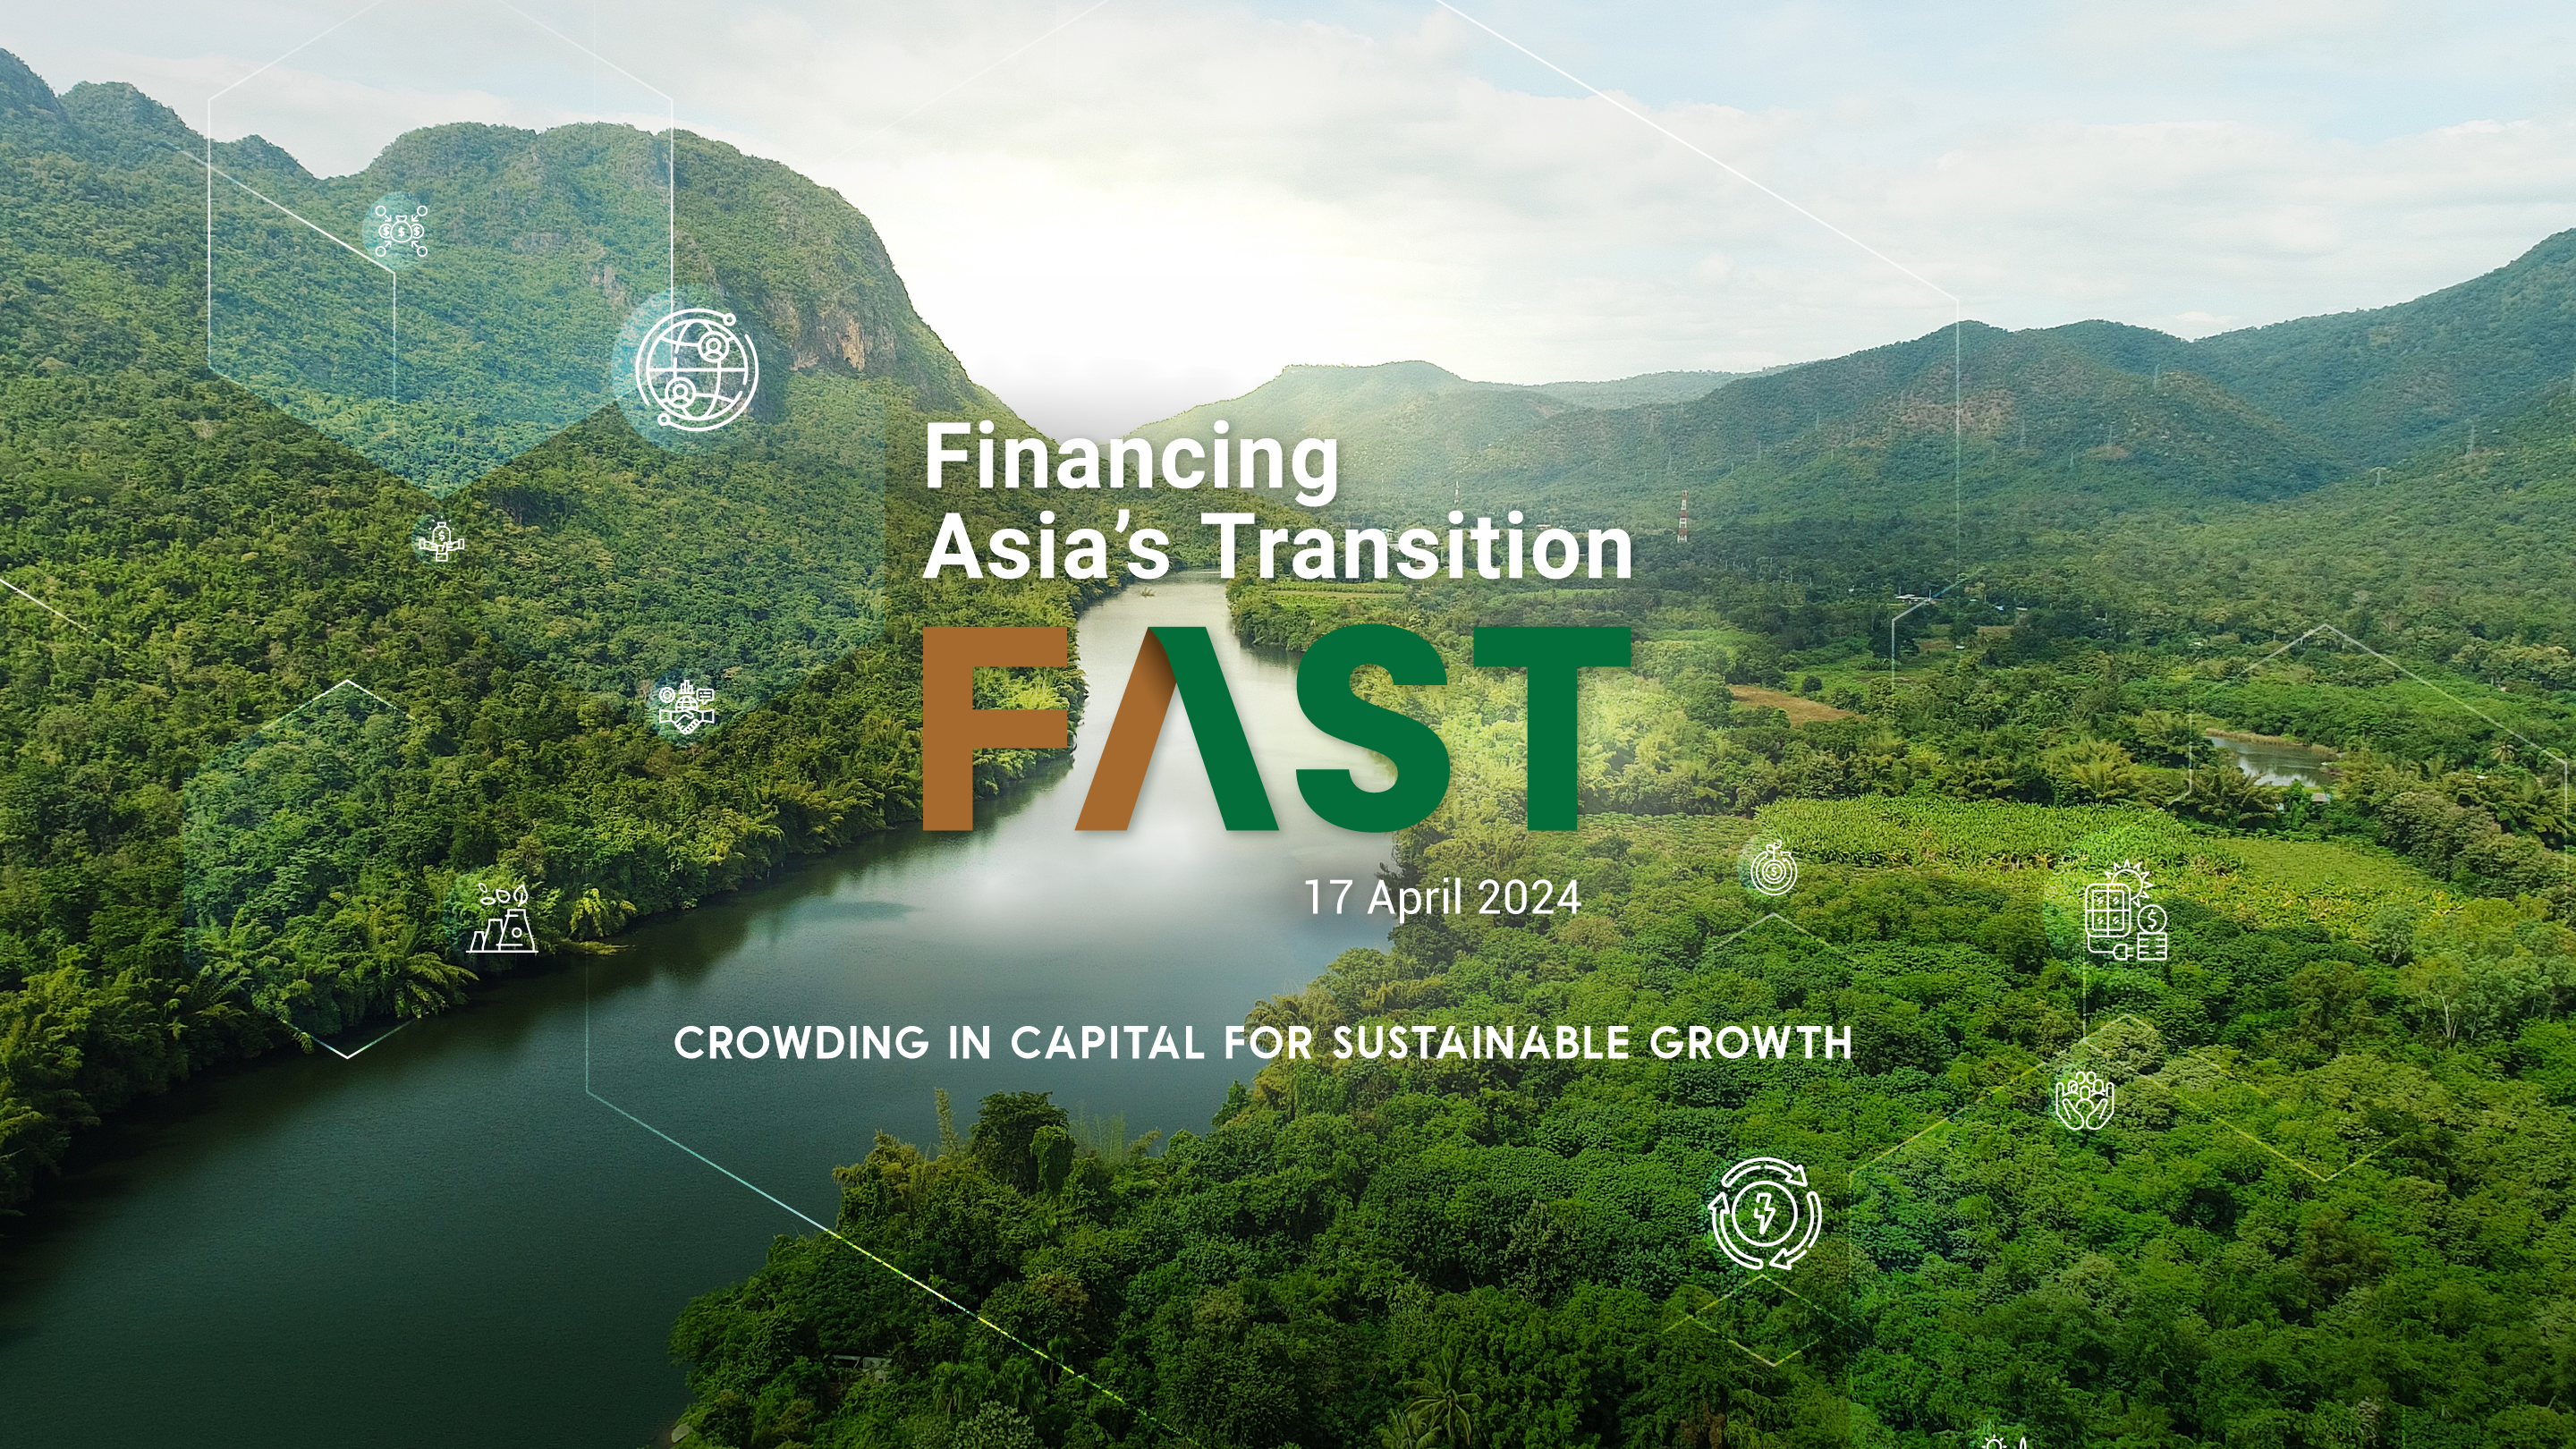 Financing Asia’s Transition (FAST) Conference 2024